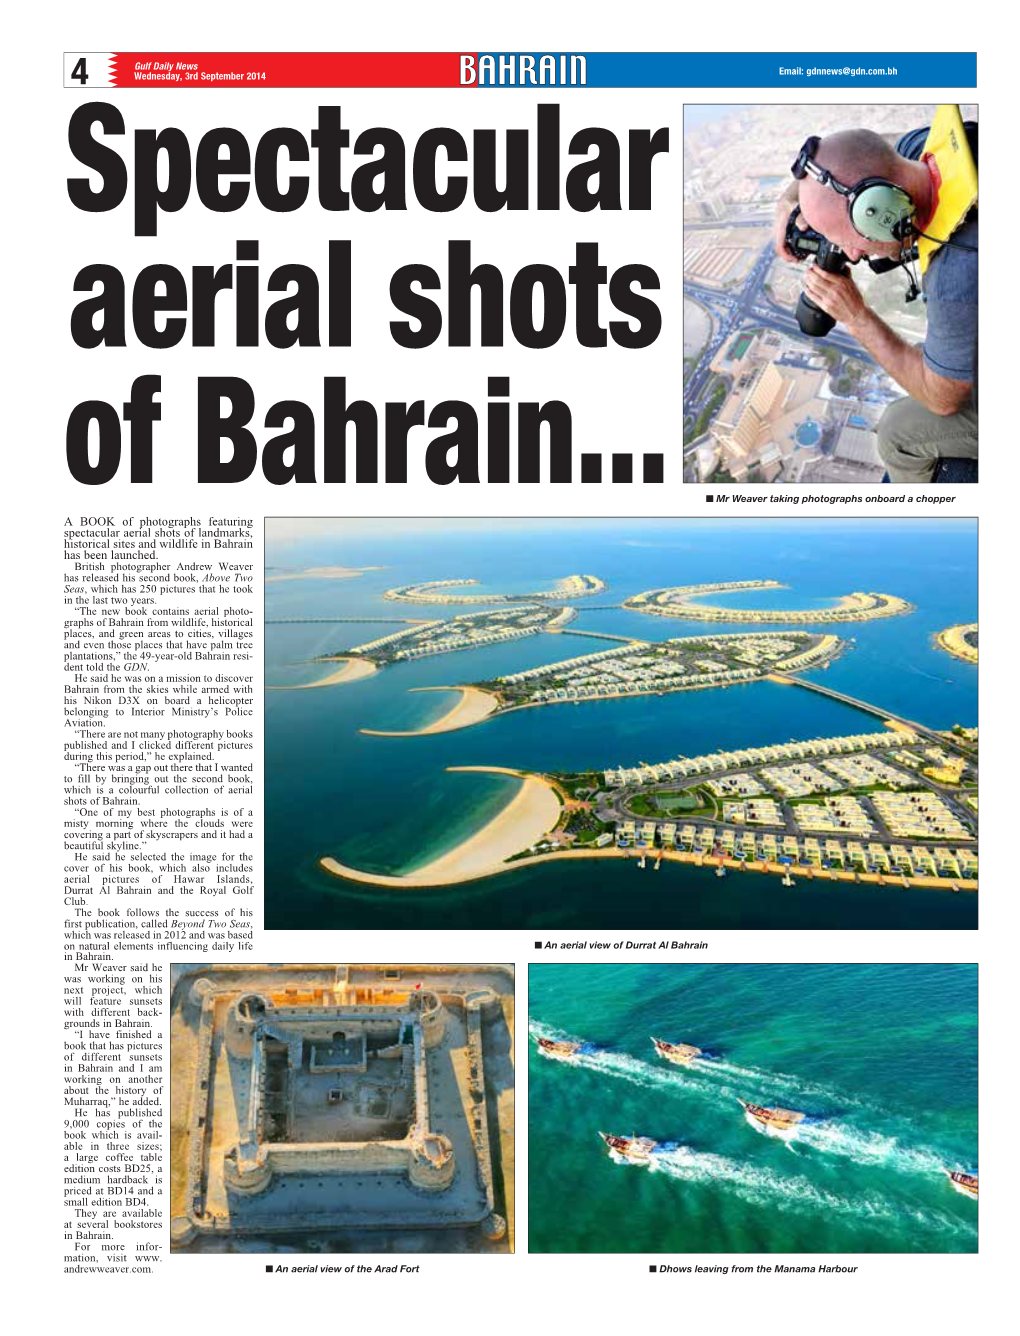 A BOOK of Photographs Featuring Spectacular Aerial Shots of Landmarks, Historical Sites and Wildlife in Bahrain Has Been Launched